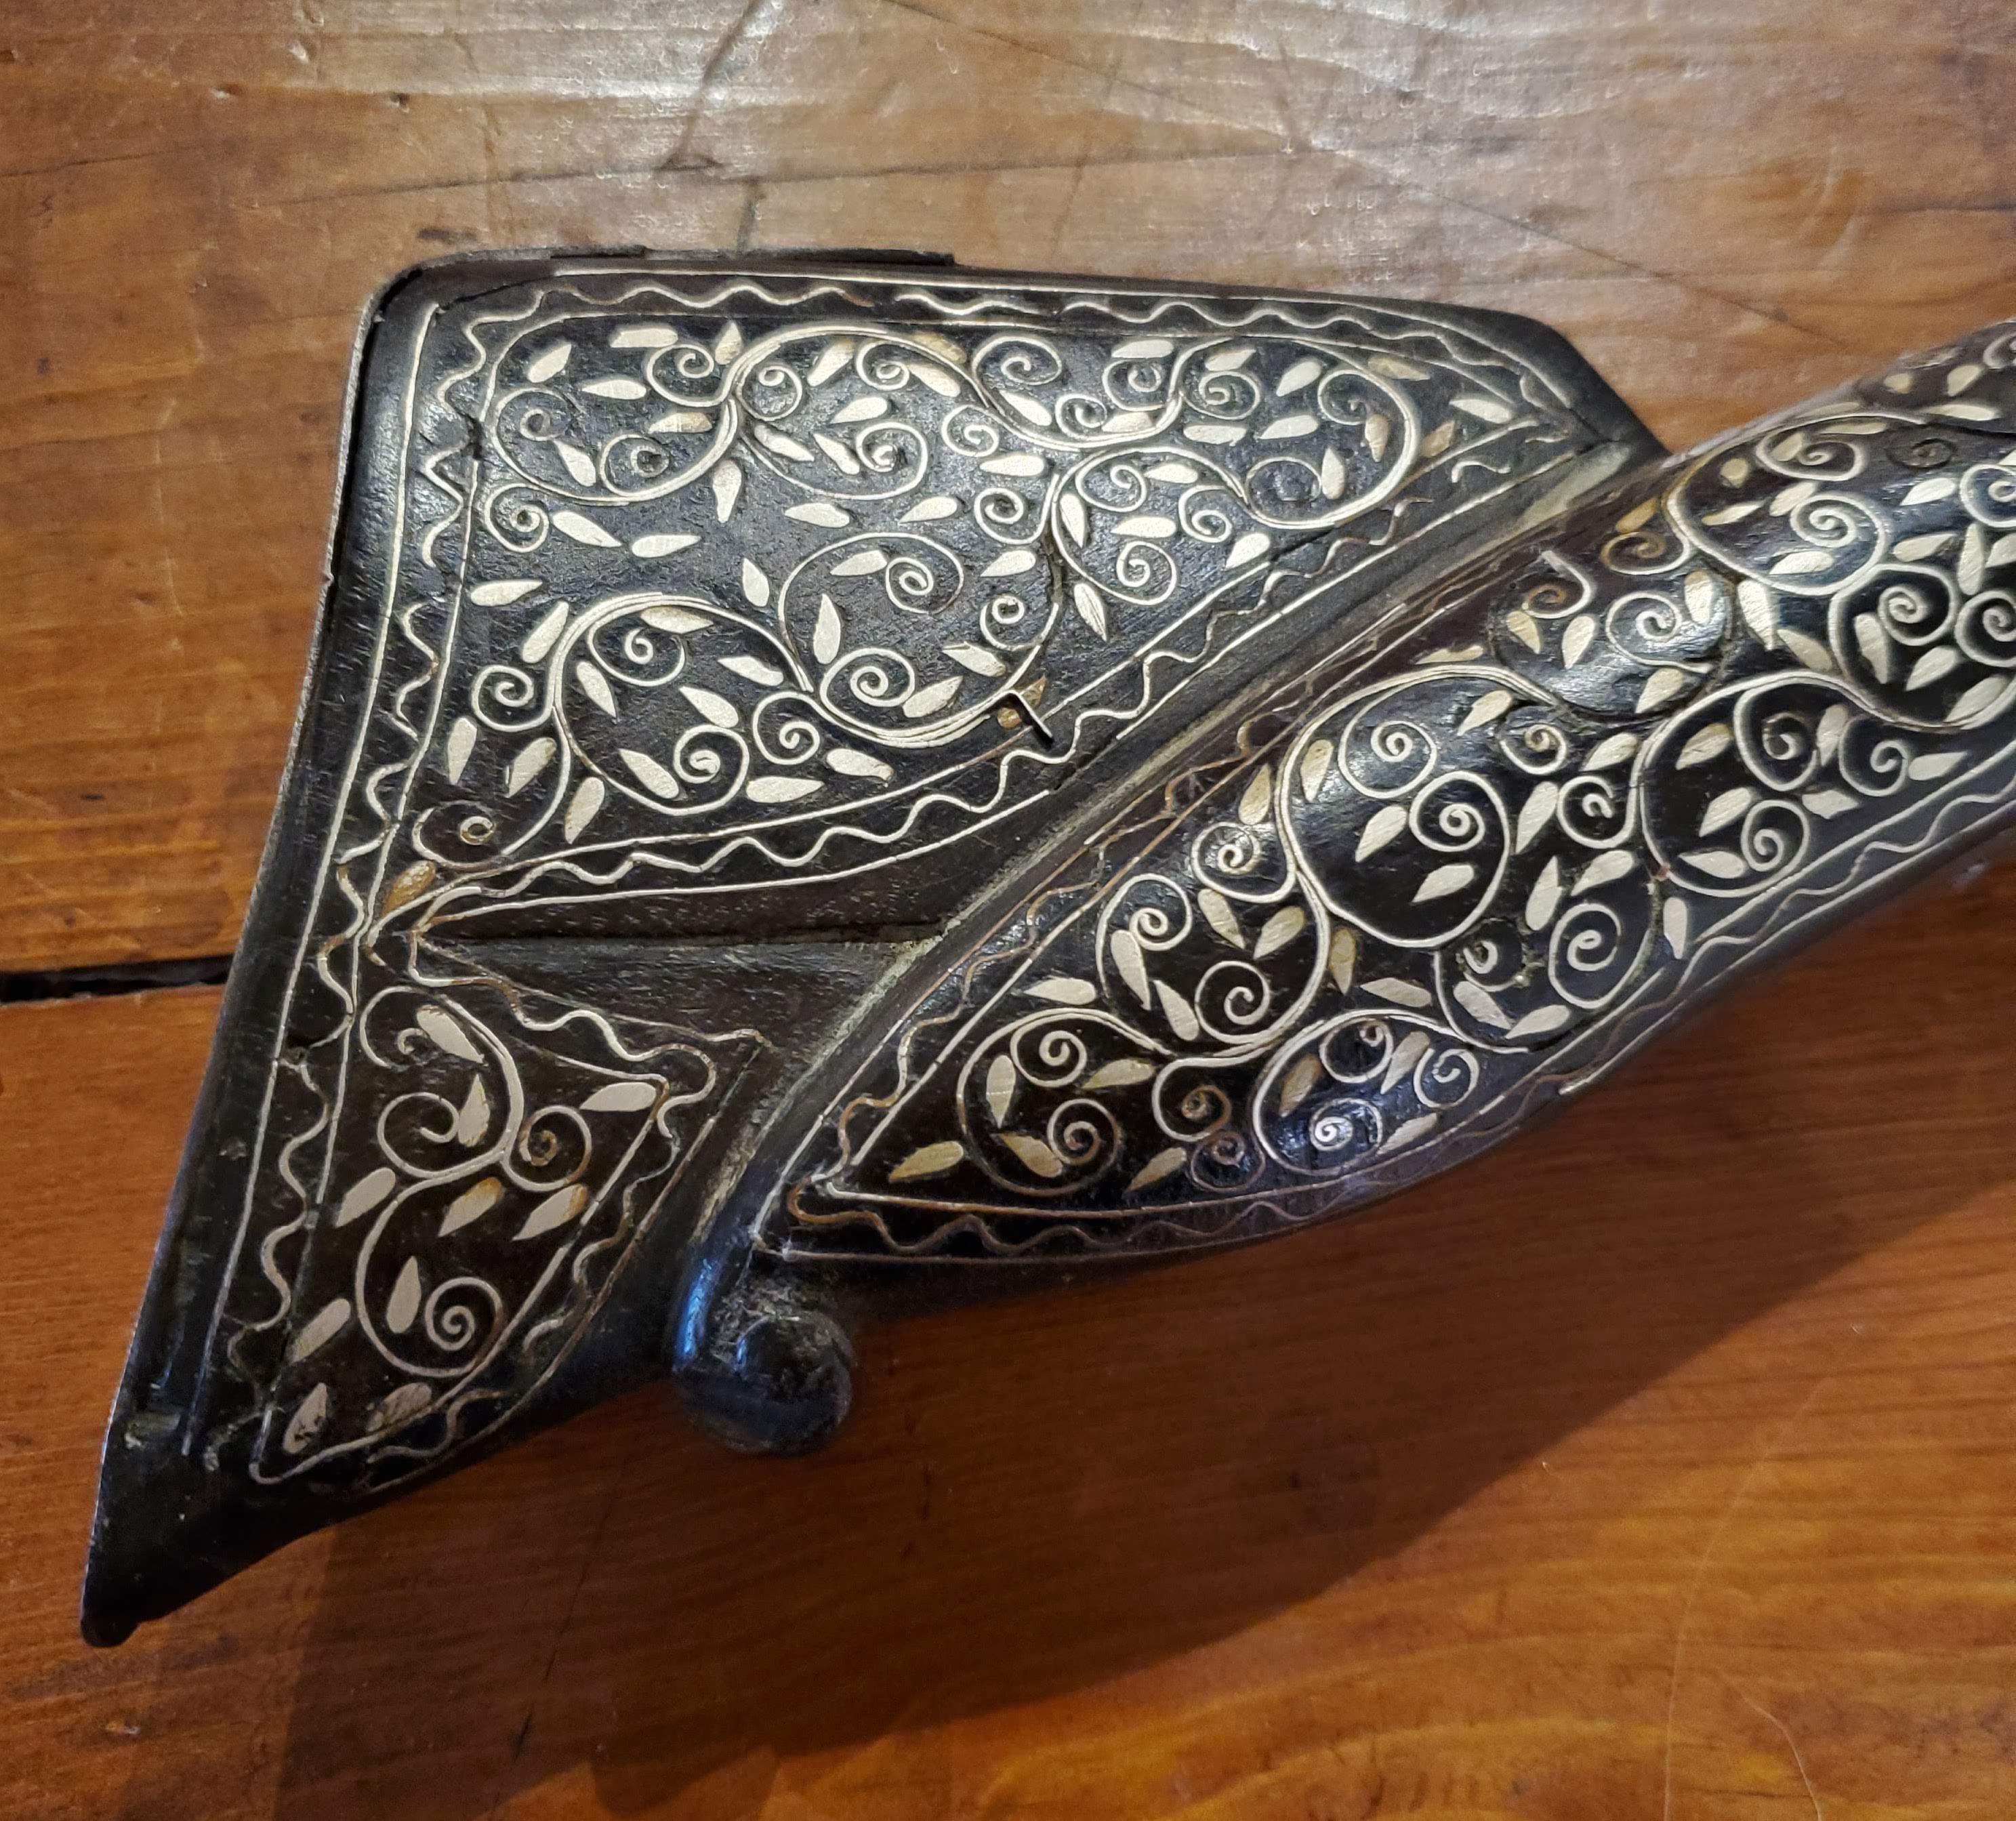 Mid-18th century Persian blunderbuss with intricate silver inlay. Perfect for collectors of arms or unique pieces of art. Safari themed room, perhaps. Made during the Ottoman Empire, circa 1750.
Measures: 17.75